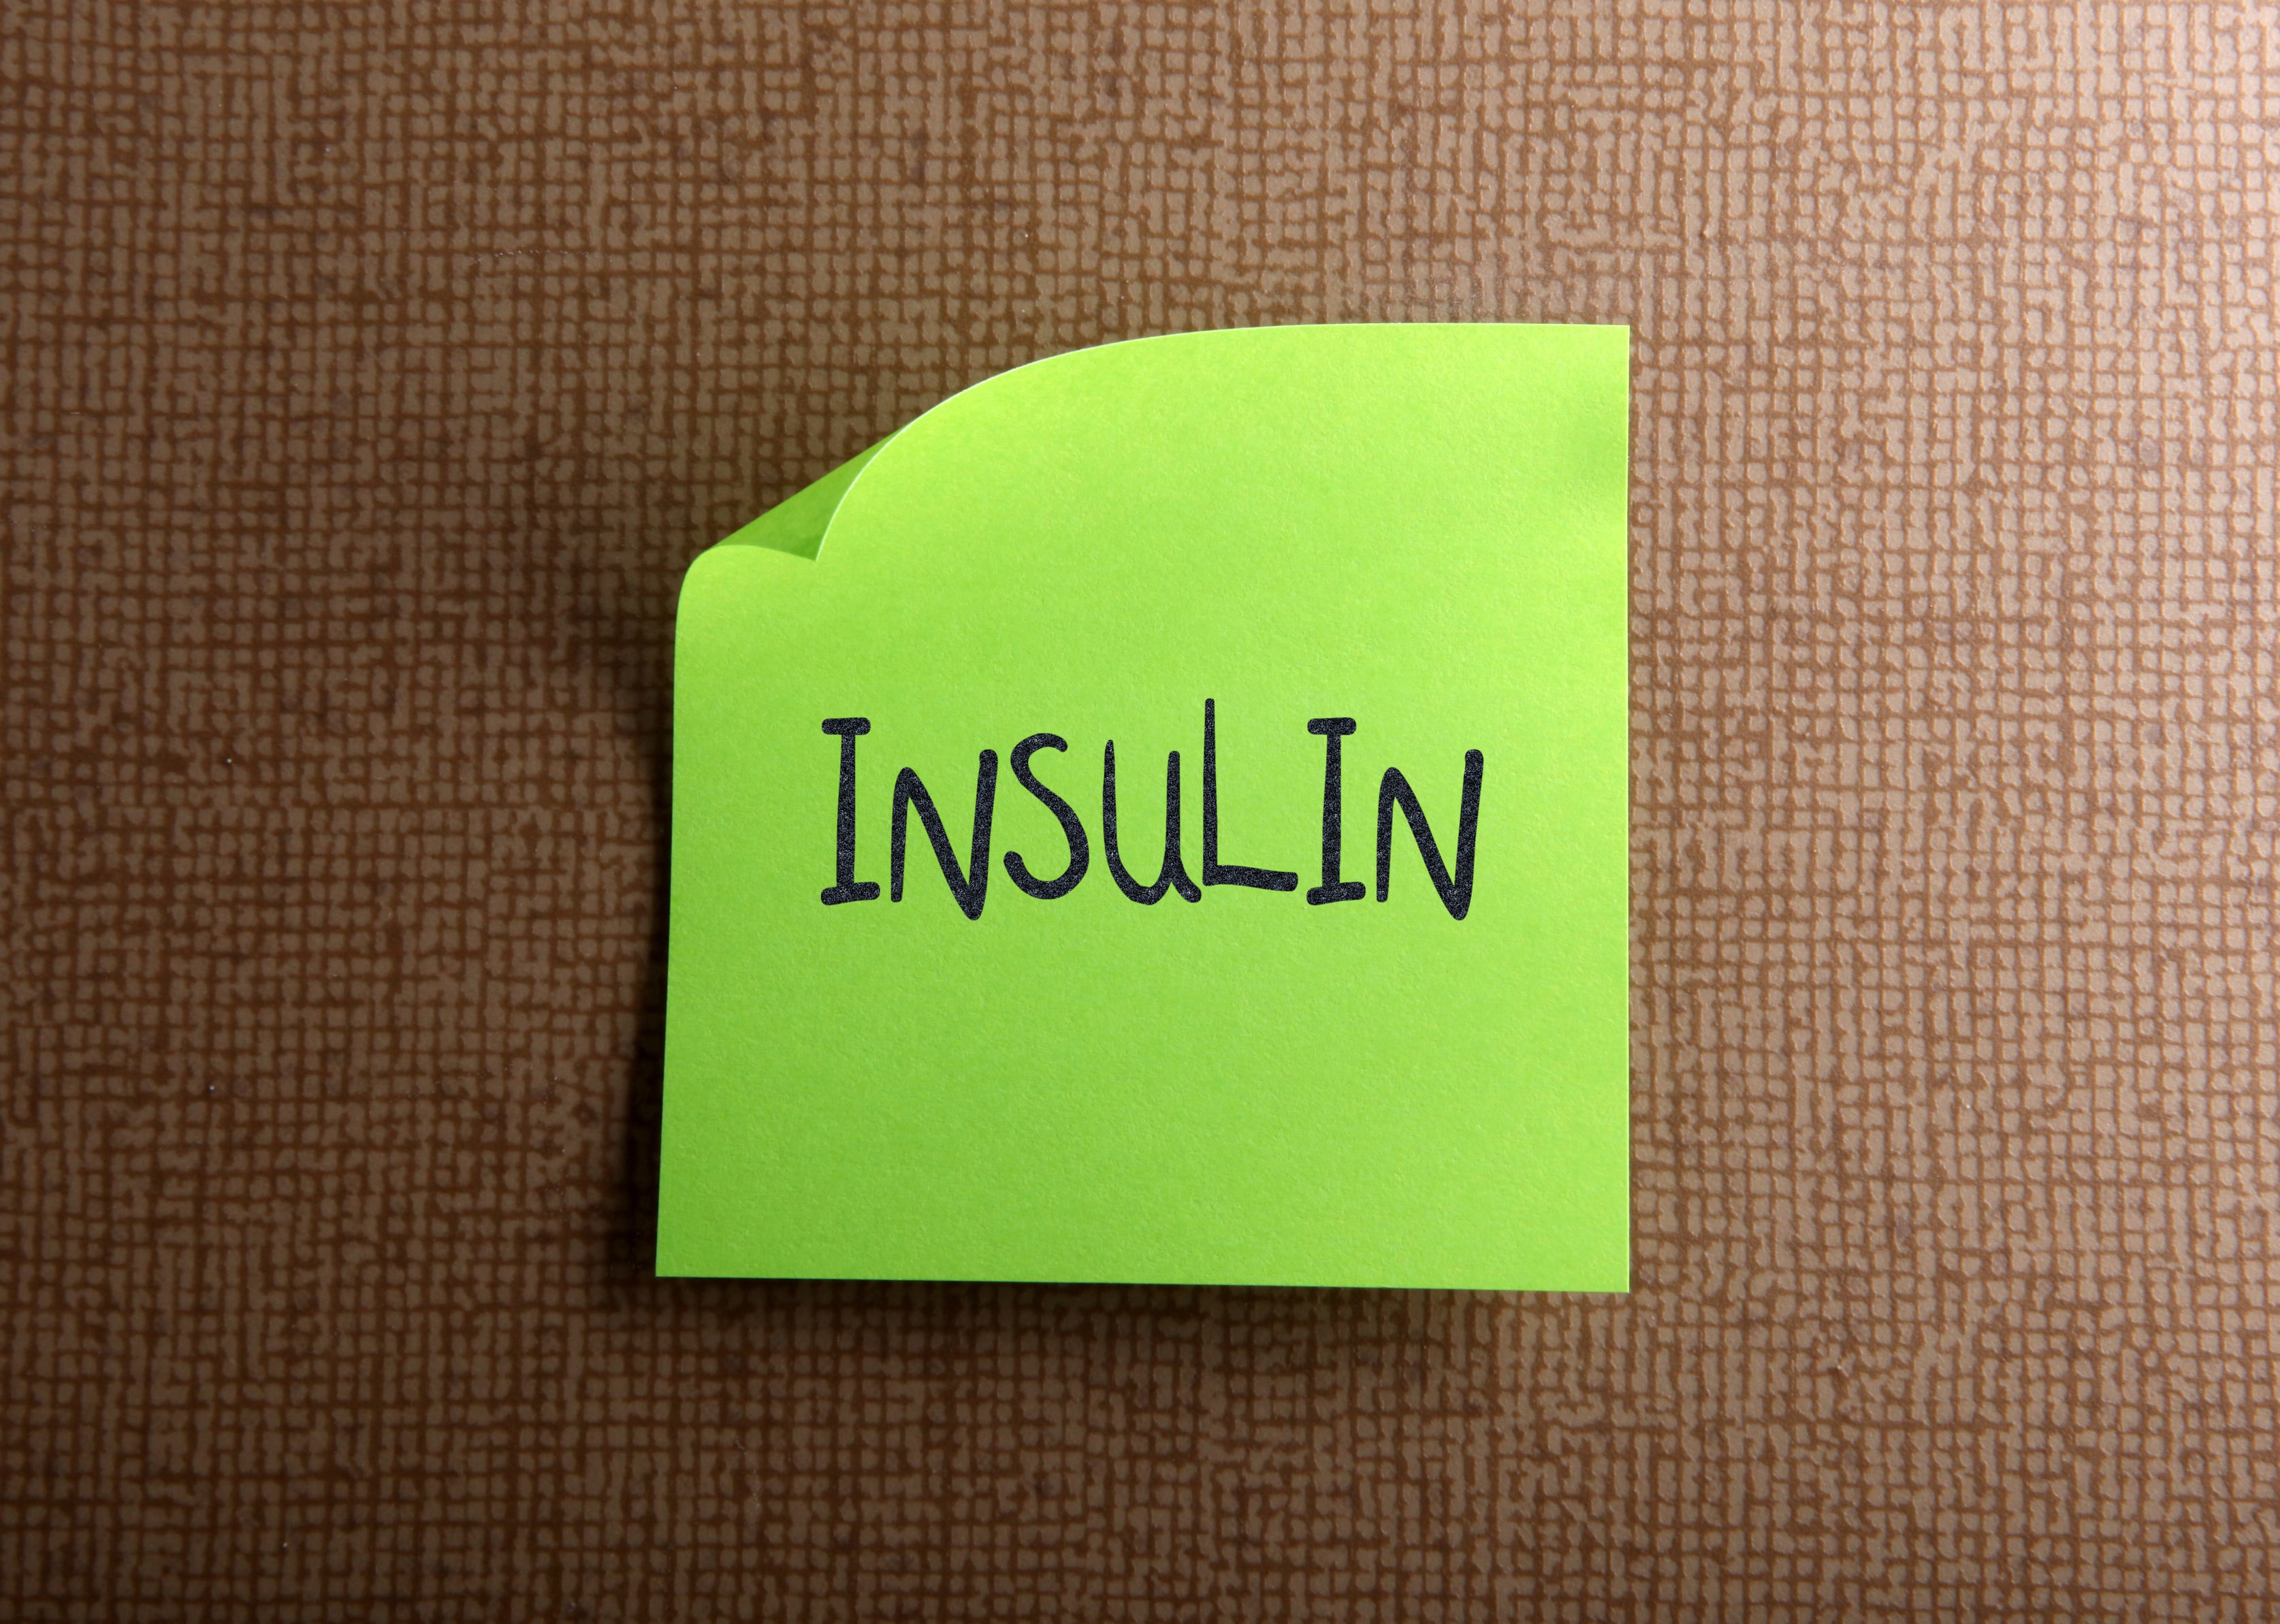 Case Western Researchers take notes about insulin therapy for stroke prevention